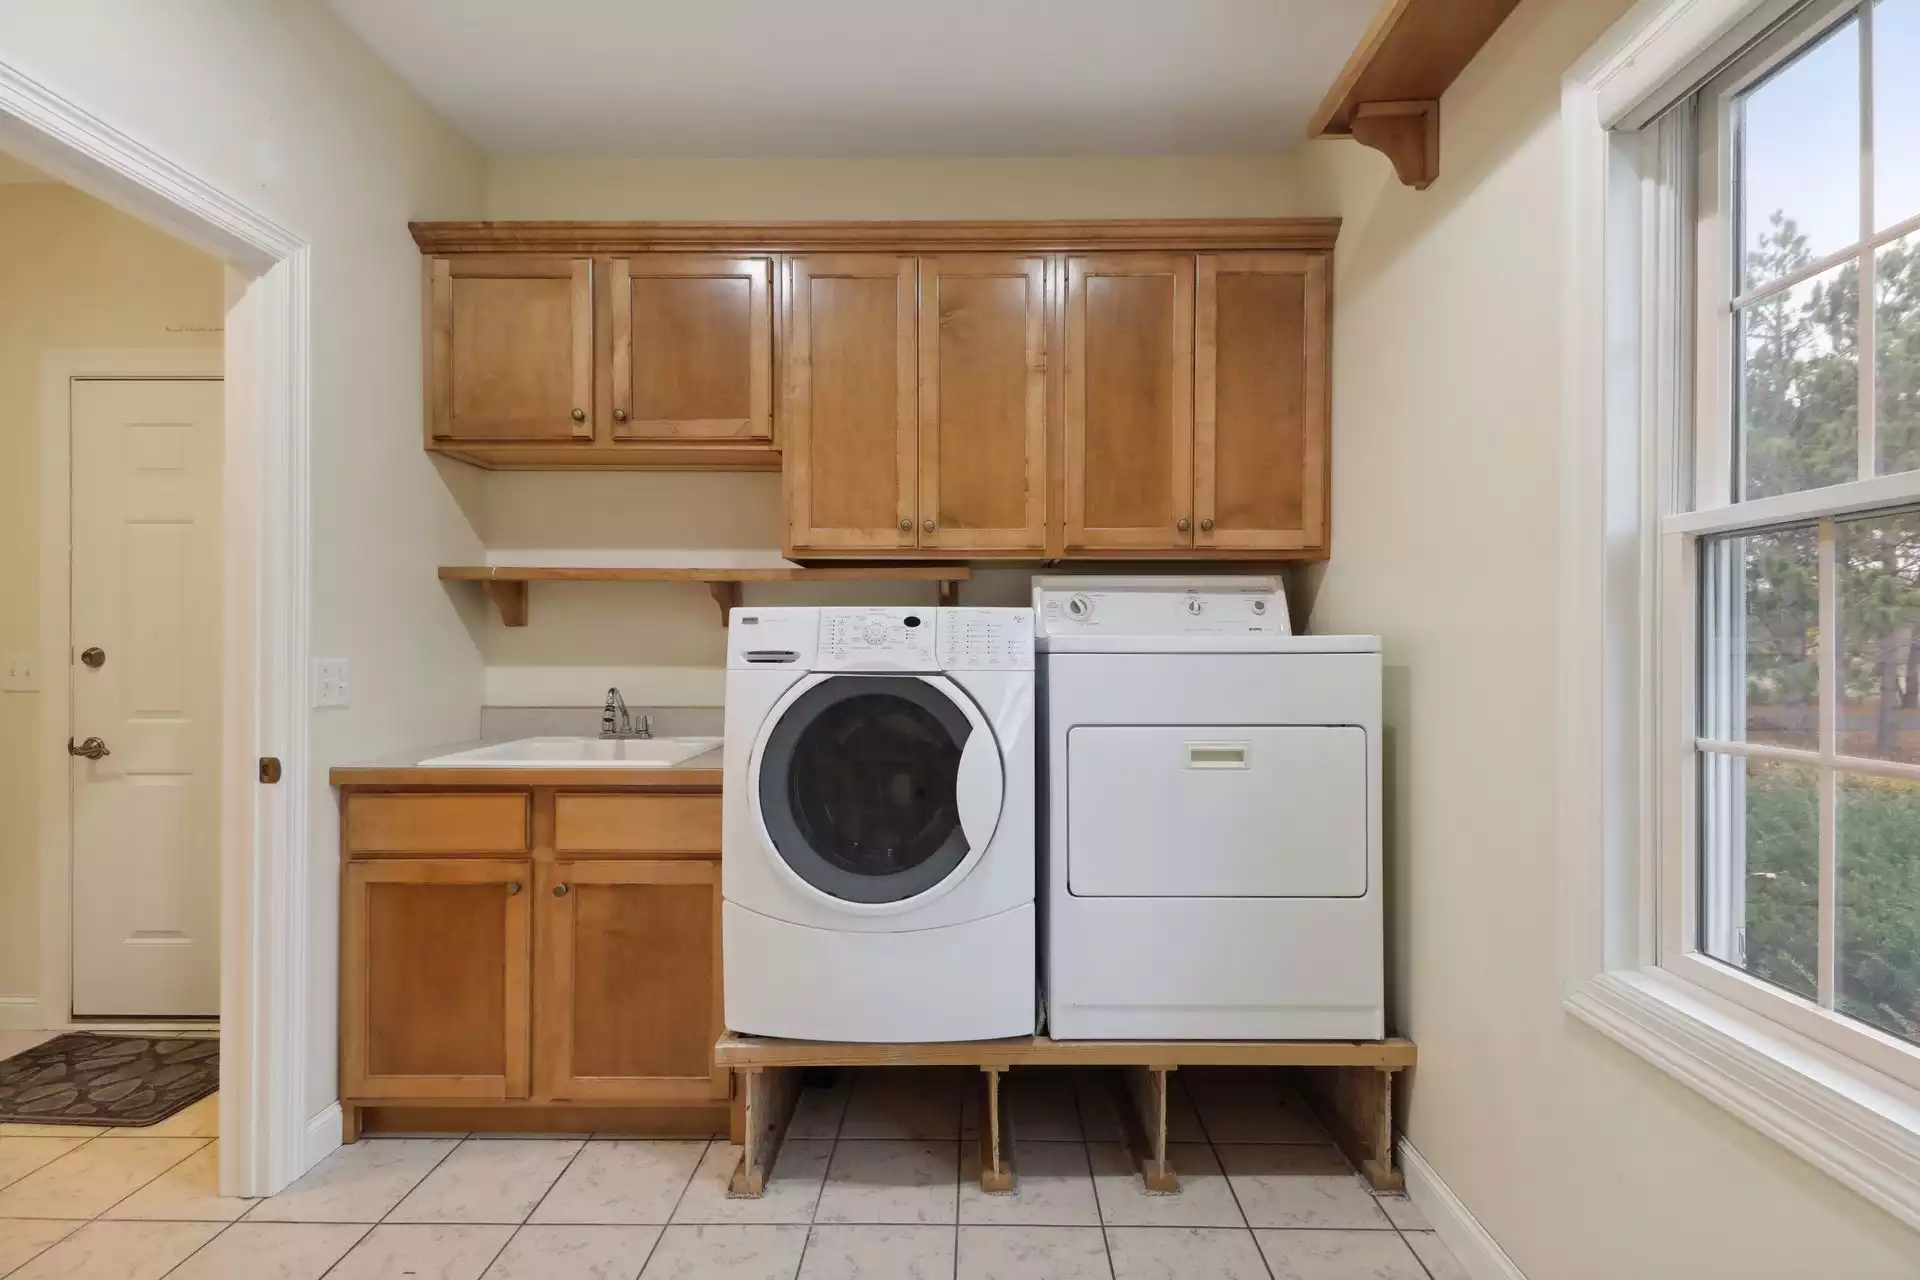 Laundry room washer & dryer on risers